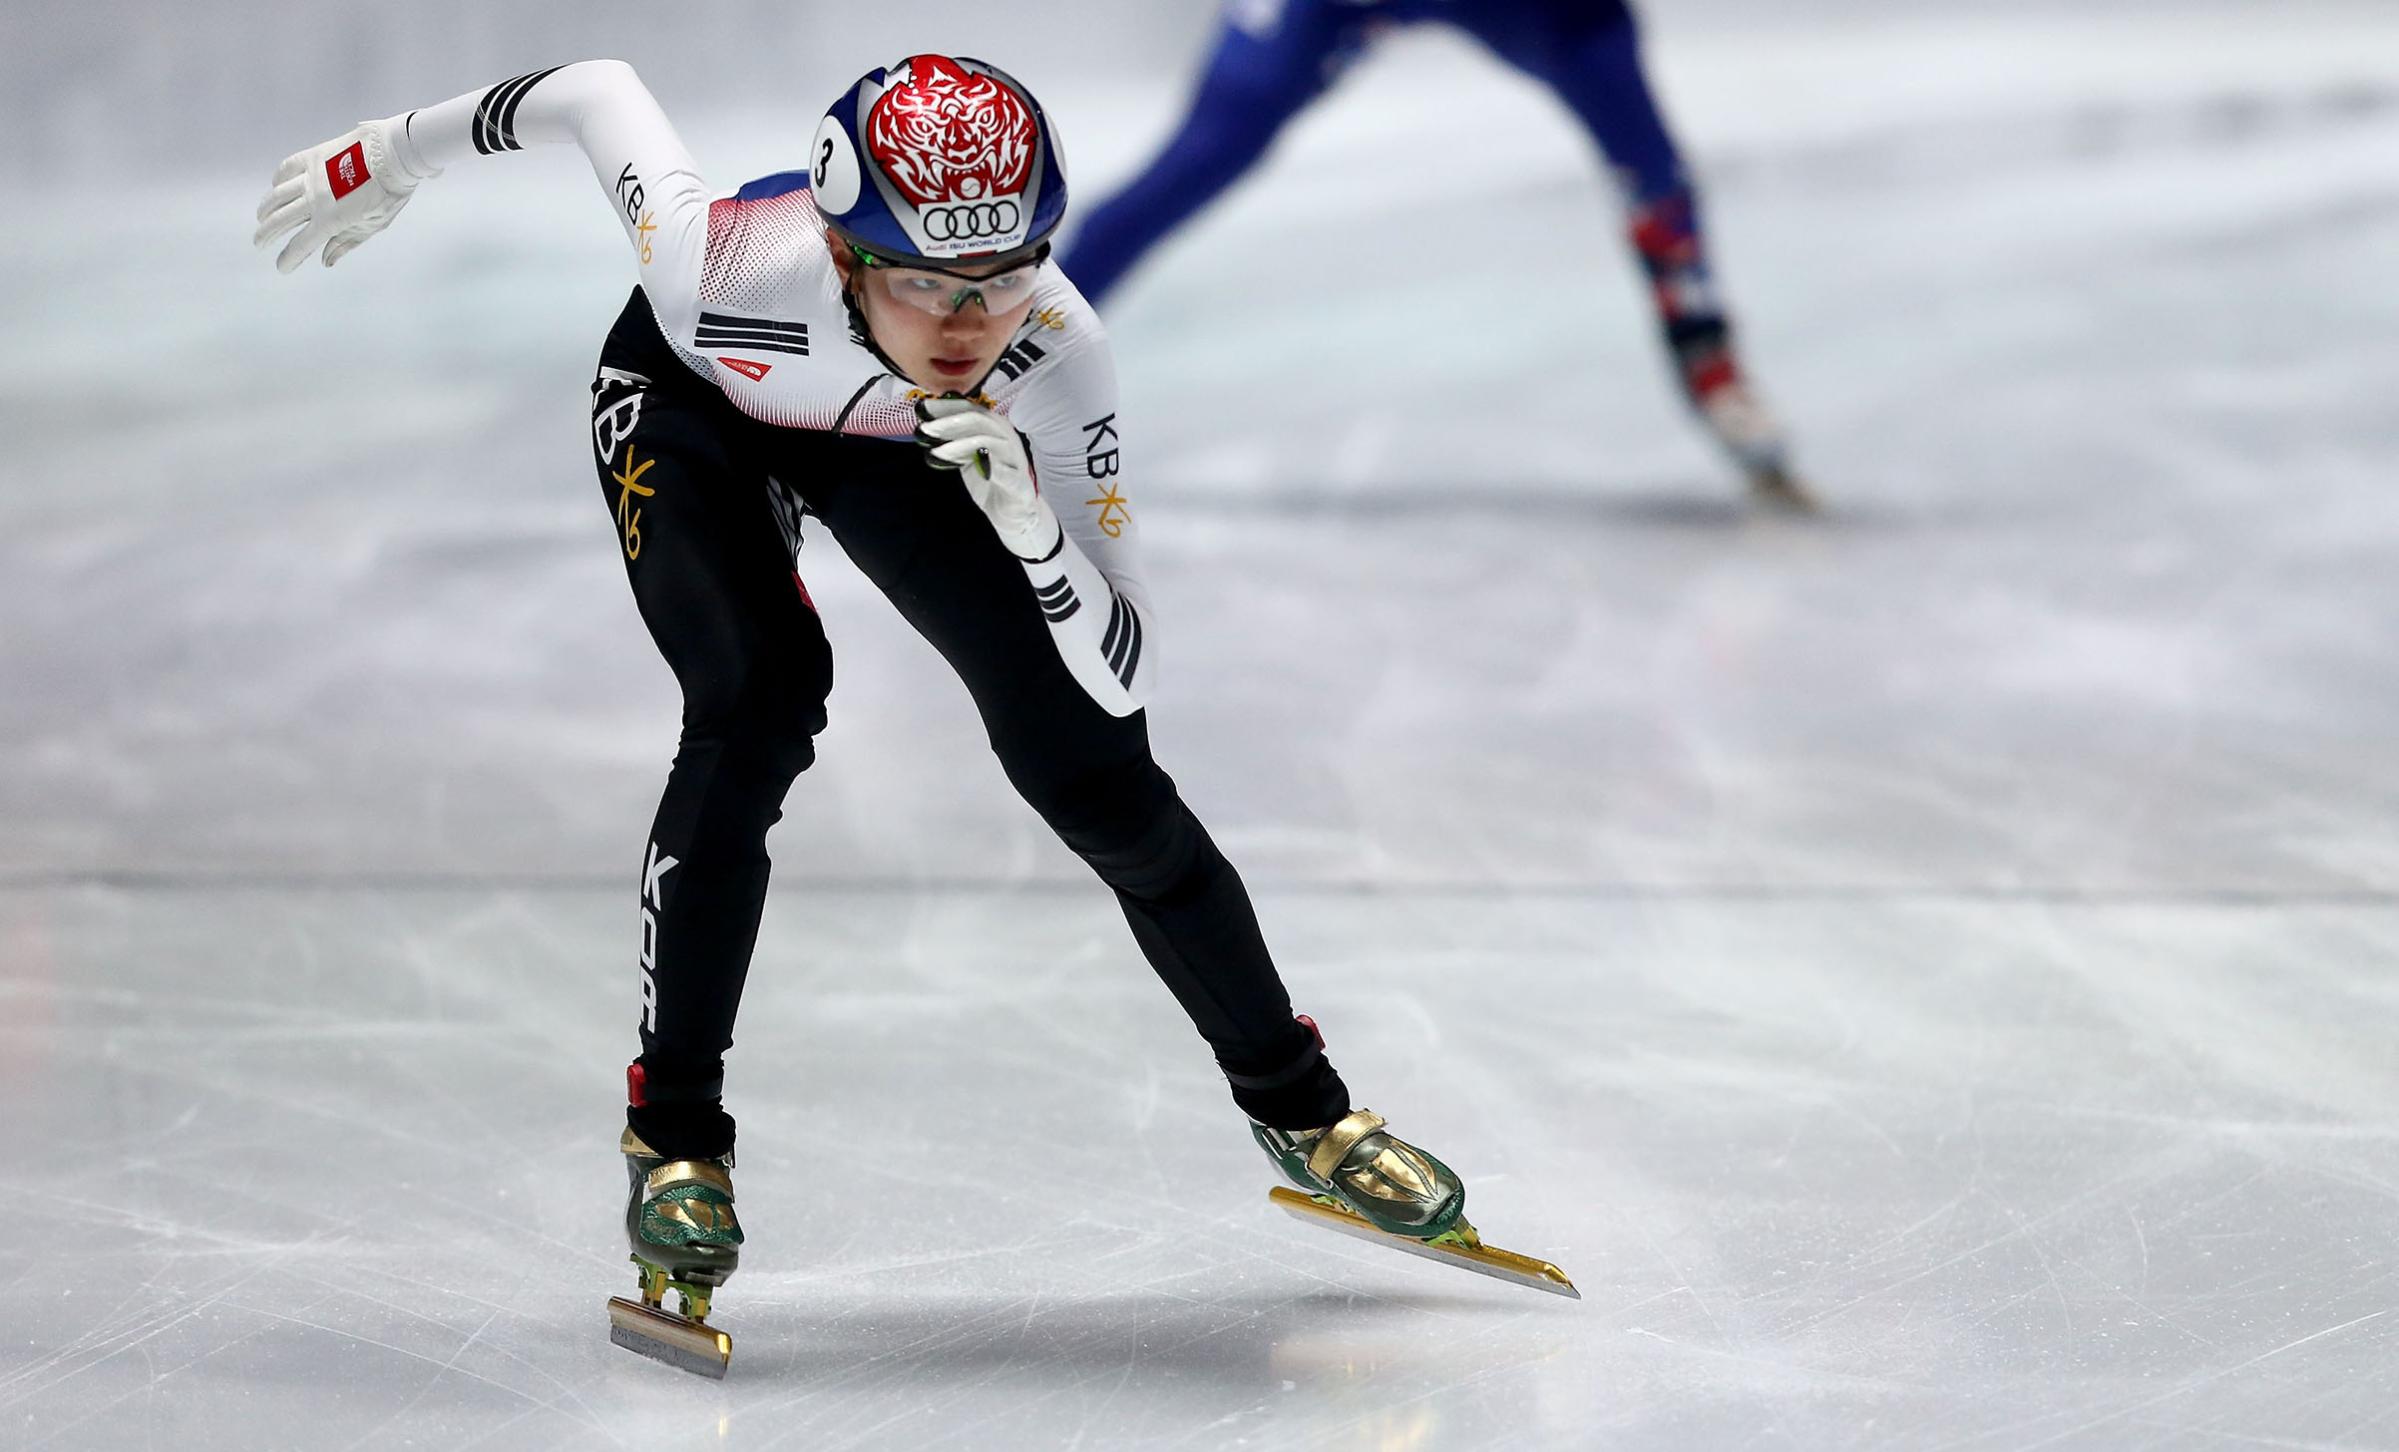 Hee Suk Shim of Korea competes of the ladies 3000m relay final A during the Audi ISU World Cup Short Track Speed Skating at Bok Hall in Budapest, Hungary, on Oct. 1, 2017.